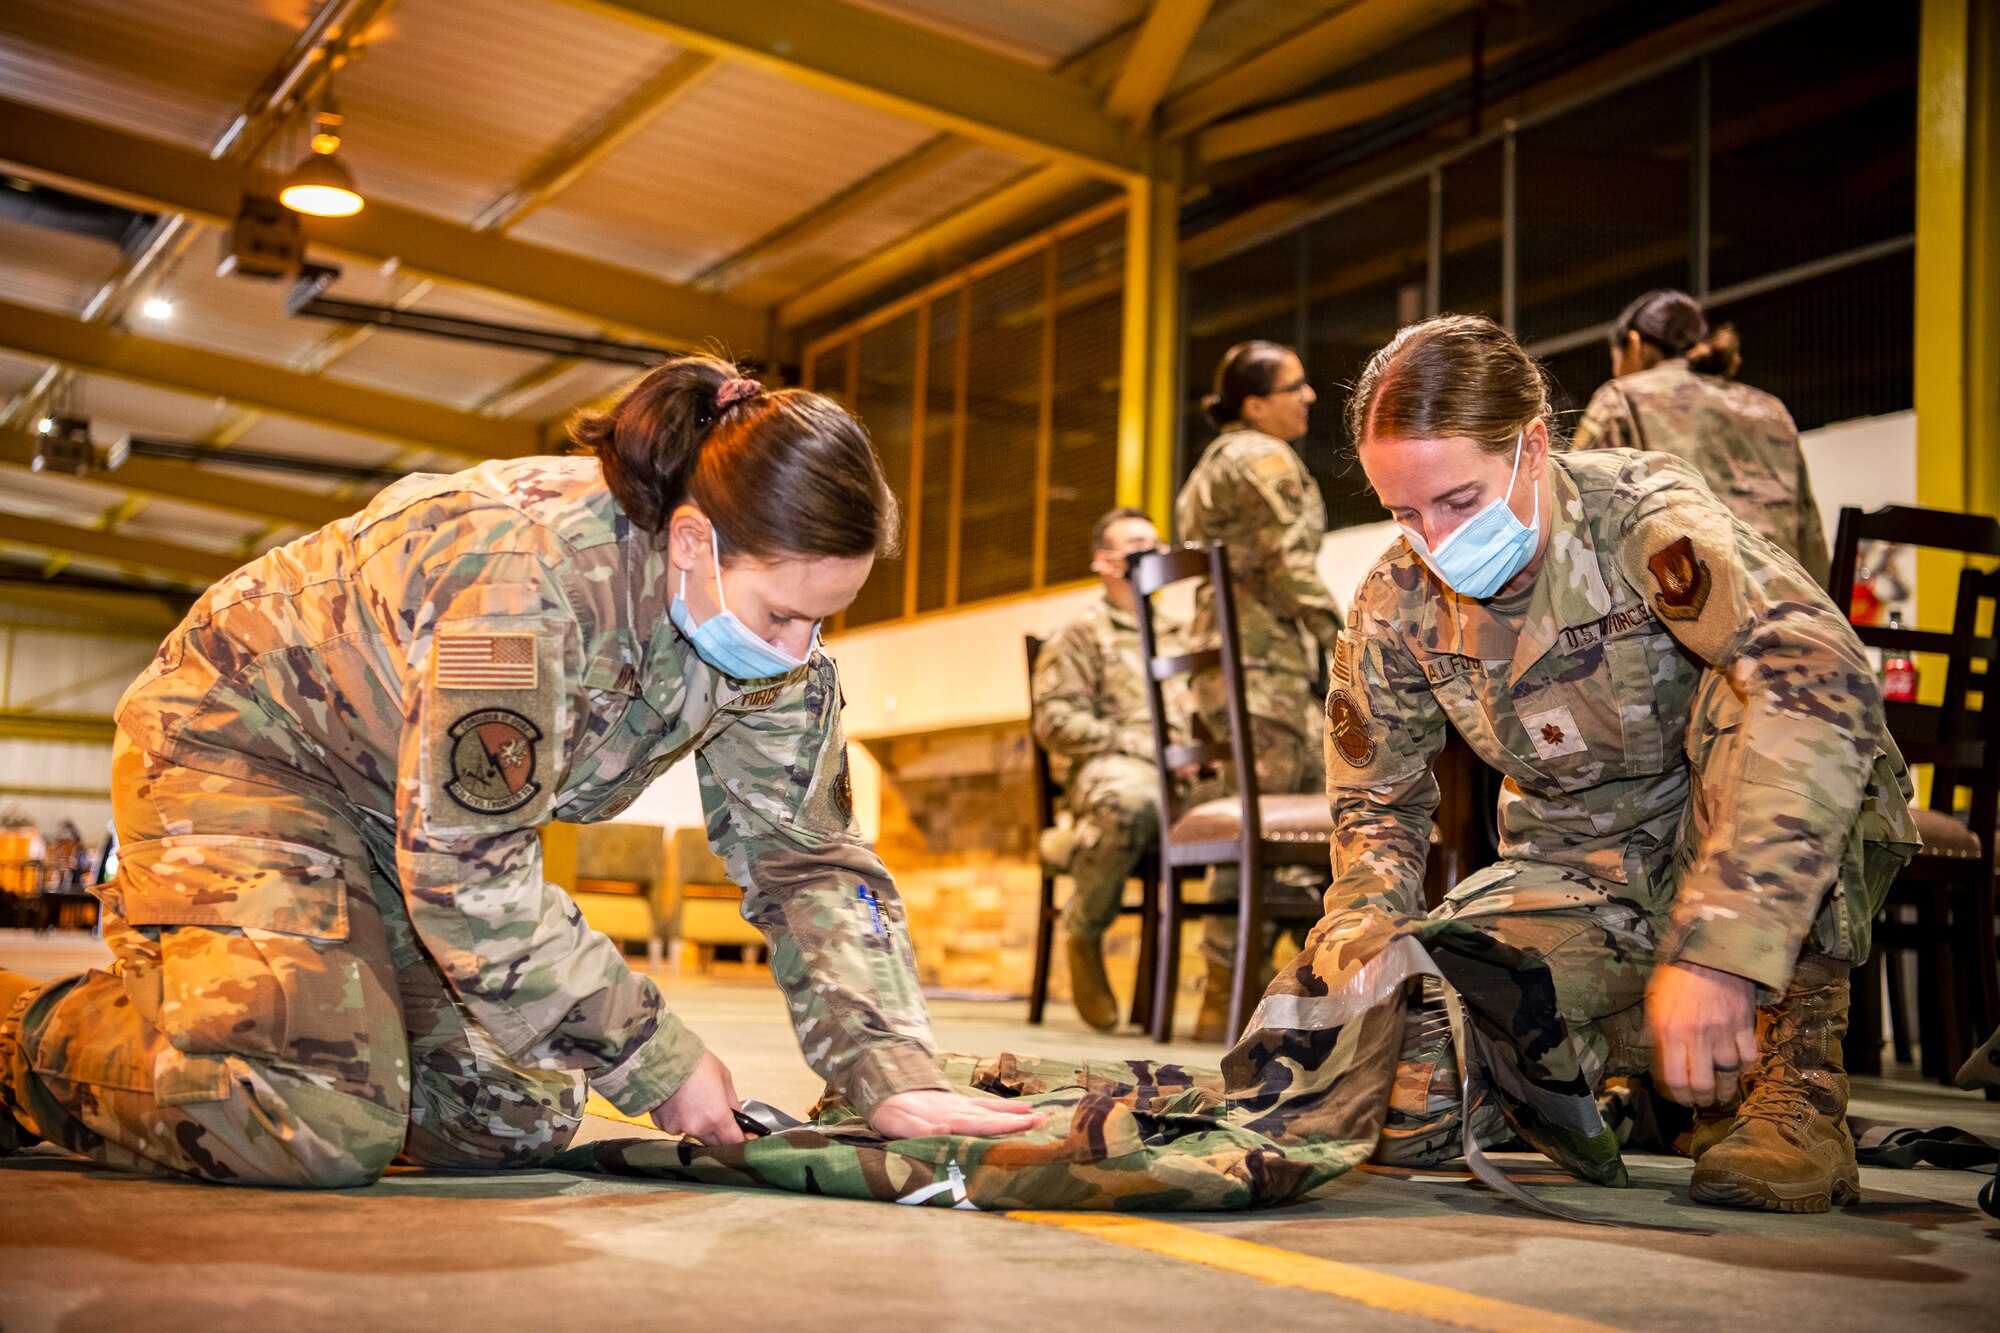 U.S. Air Force Master Sgt. Terri Adams, left, 423d Civil Engineer Squadron NCO in charge of emergency management and Maj. Erica Balfour, 423d Communications Squadron commander, prepare Mission Oriented Protective Posture gear prior to participating in Ability to Survive and Operate training at RAF Alconbury, England, Aug. 27, 2021. The ATSO rodeo was designed to reinforce Airmen’s ability to properly utilize their MOPP gear in a potential chemical environment. (U.S. Air Force photo by Senior Airman Eugene Oliver)